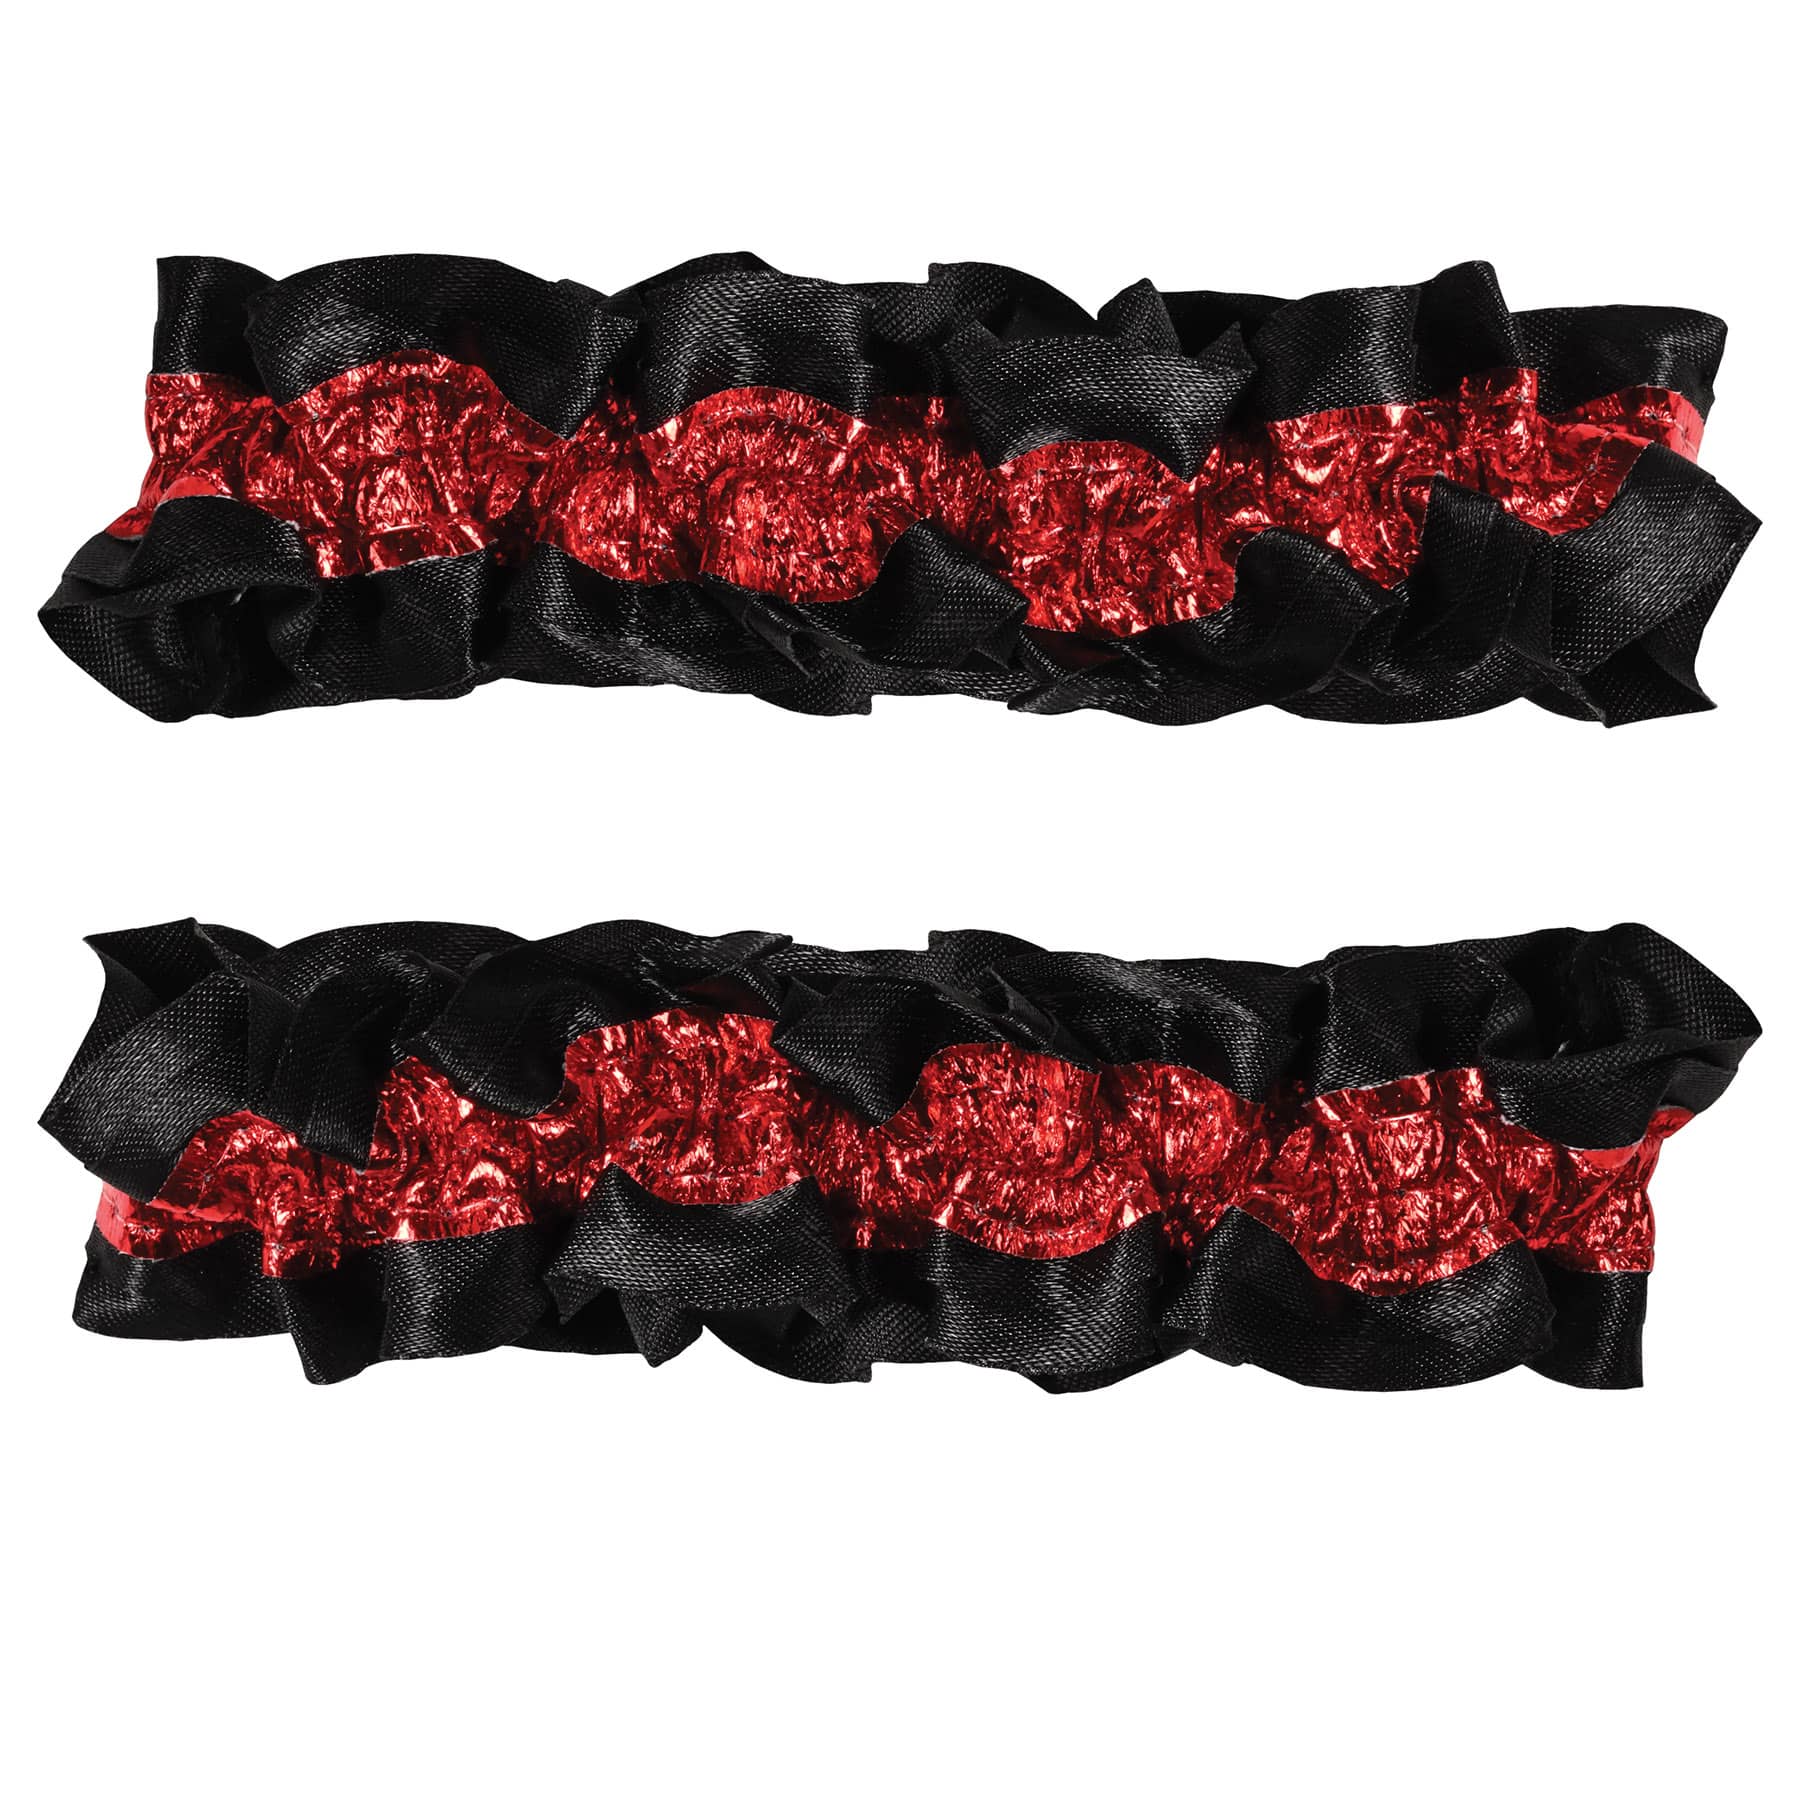 Red and Black Dealer Arm Band